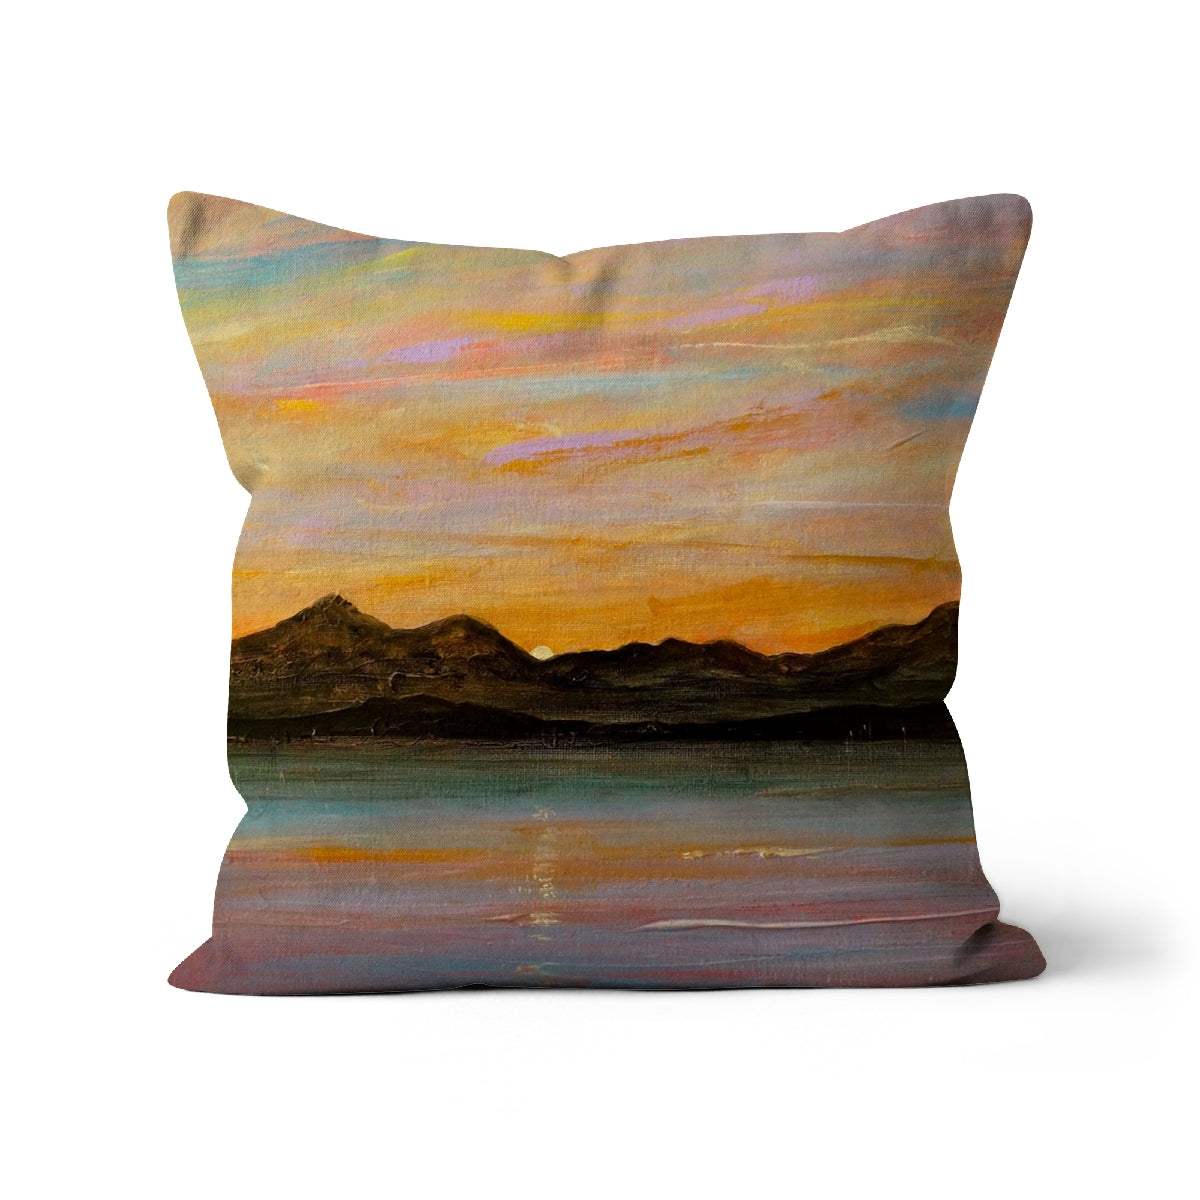 The Sleeping Warrior Arran Art Gifts Cushion-Cushions-Arran Art Gallery-Canvas-22"x22"-Paintings, Prints, Homeware, Art Gifts From Scotland By Scottish Artist Kevin Hunter